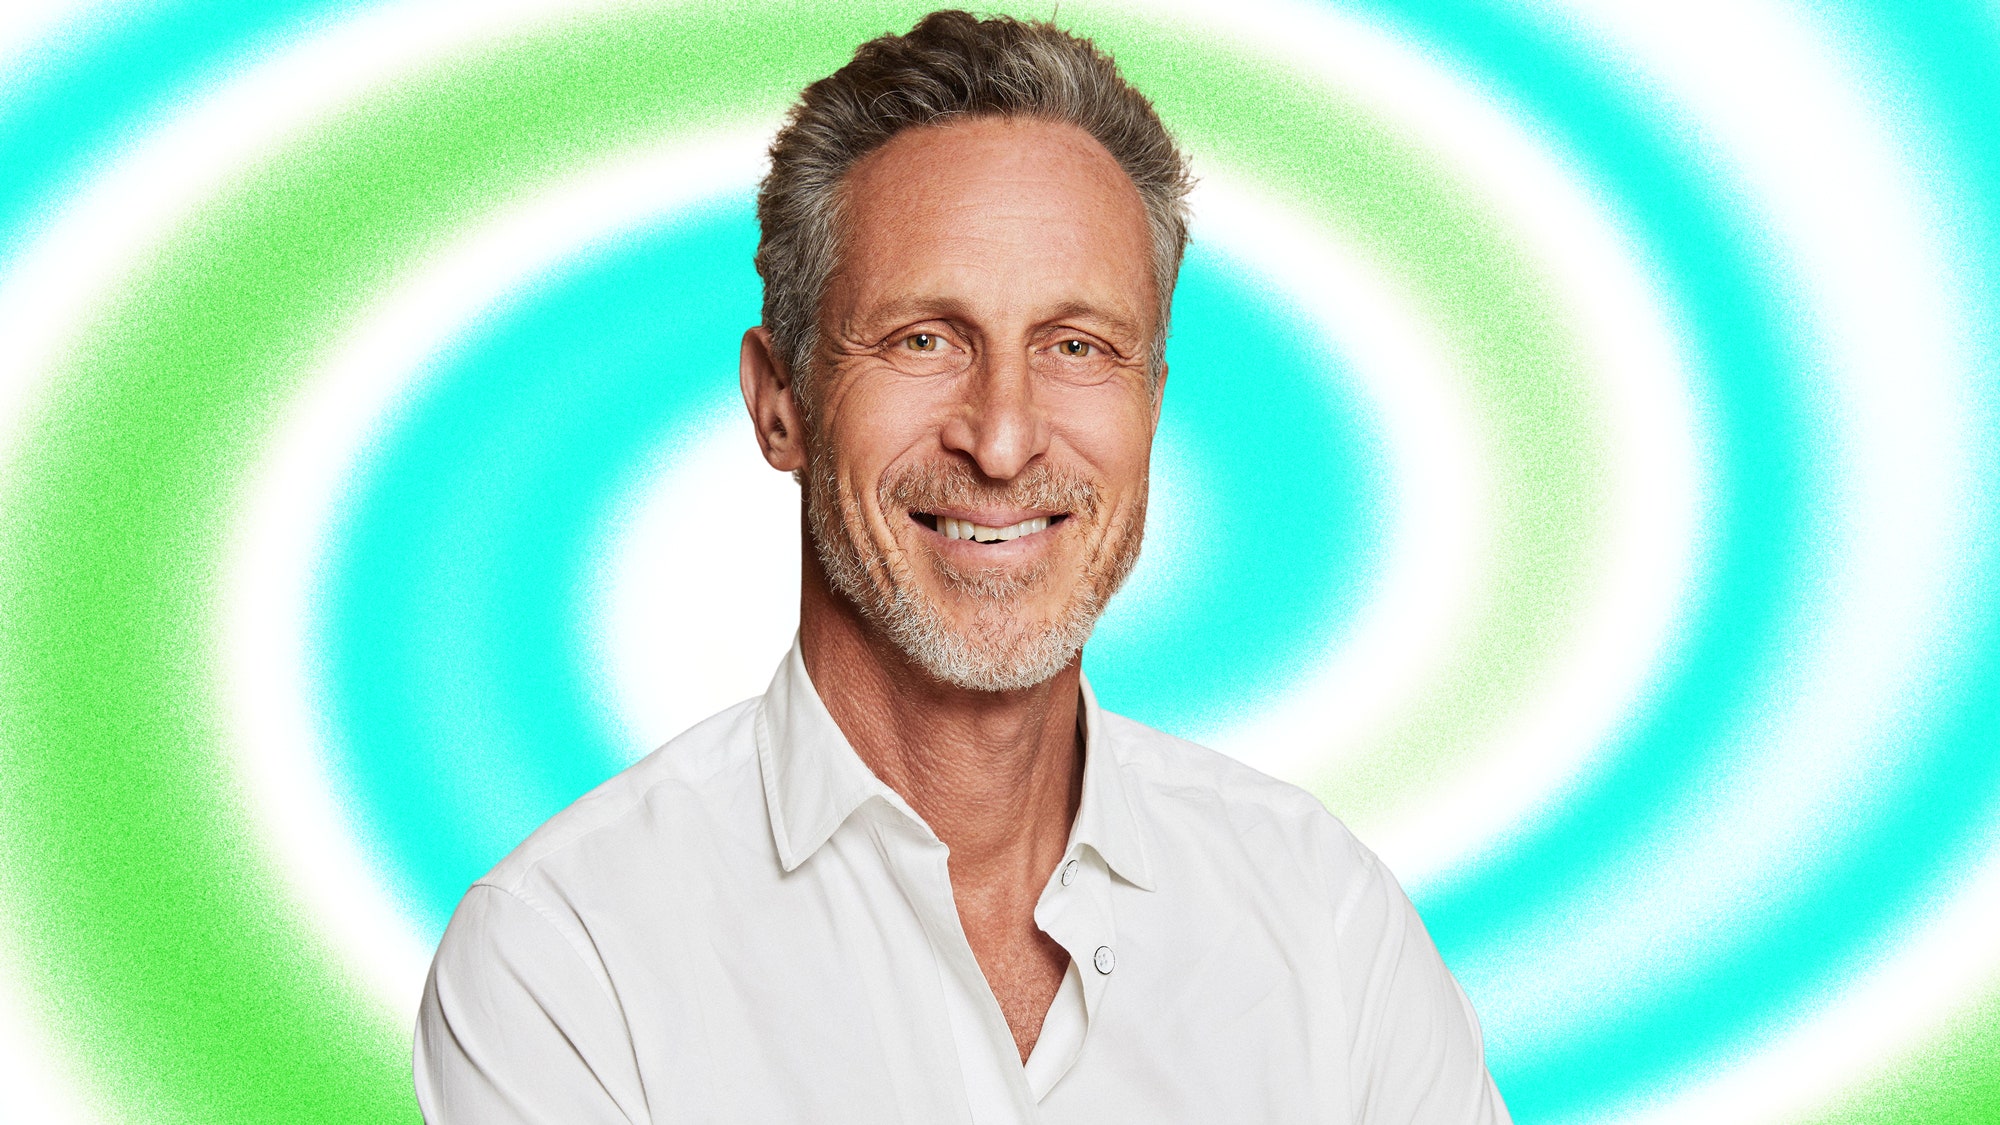 The Real Life Diet of Longevity Doctor Mark Hyman Who Developed a SixPack in His 60s